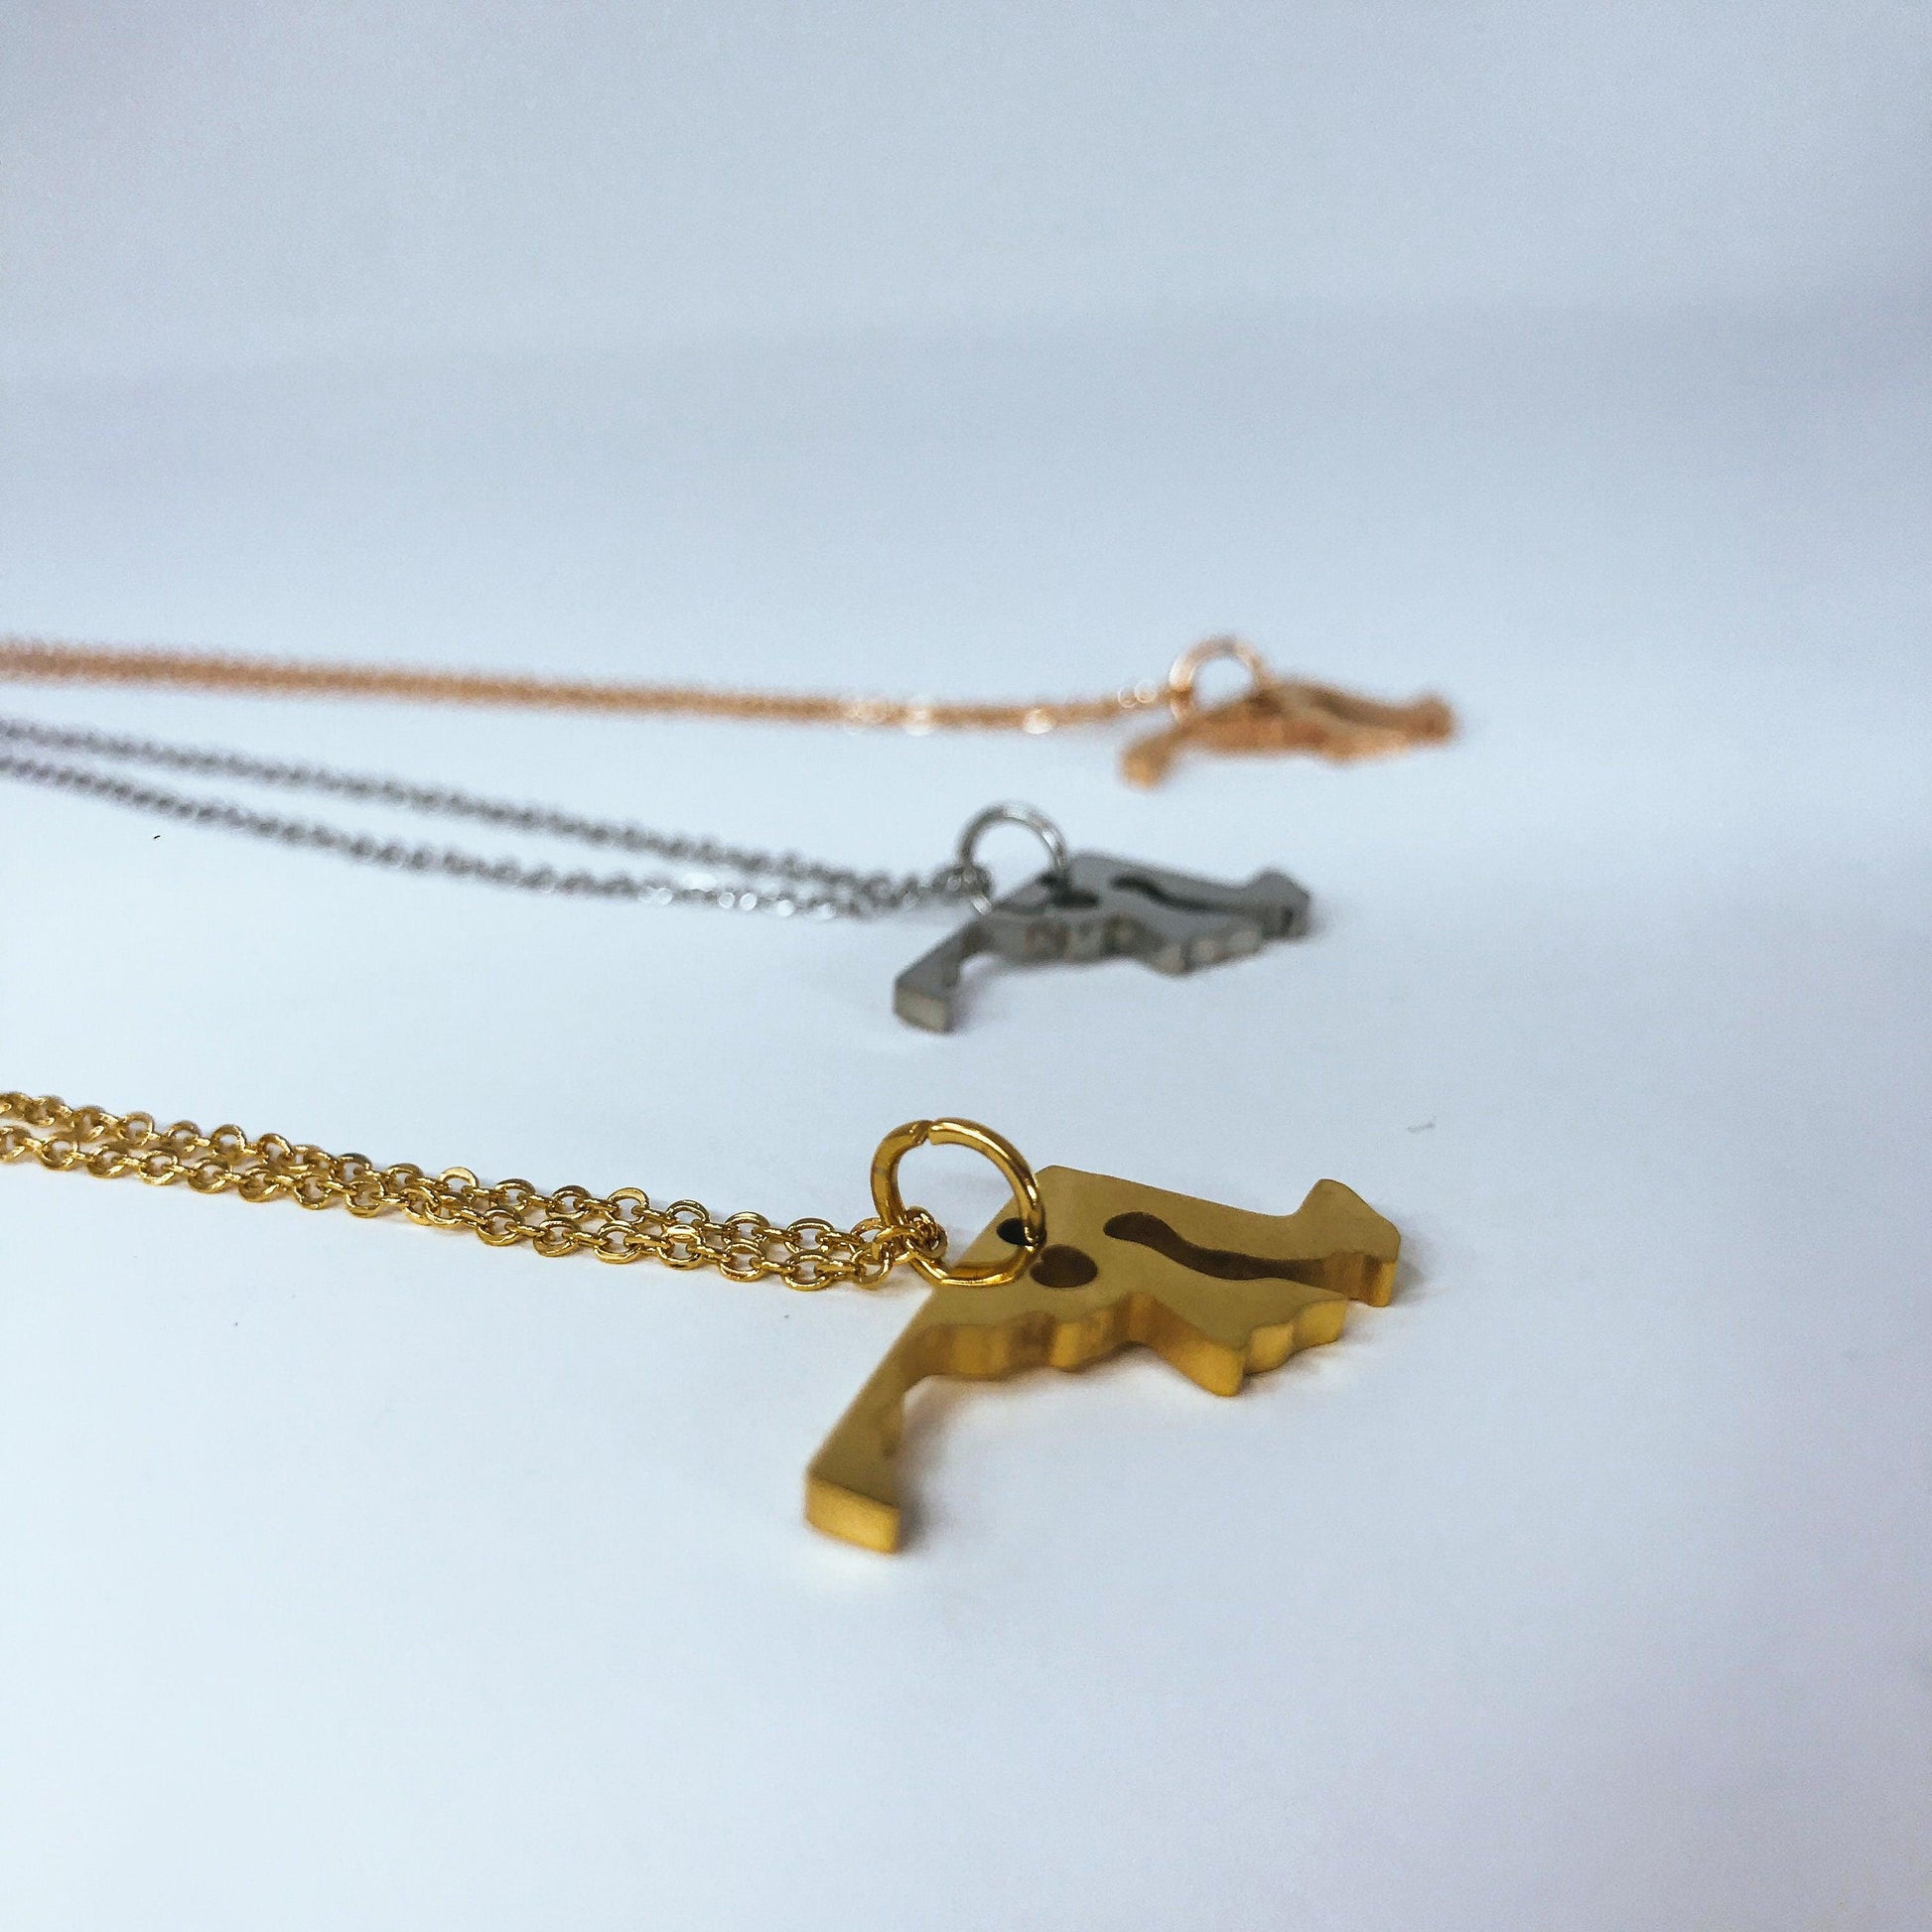 Maryland State Silhouette Necklaces in 3 different colors: Gold, Silver & Rose Gold